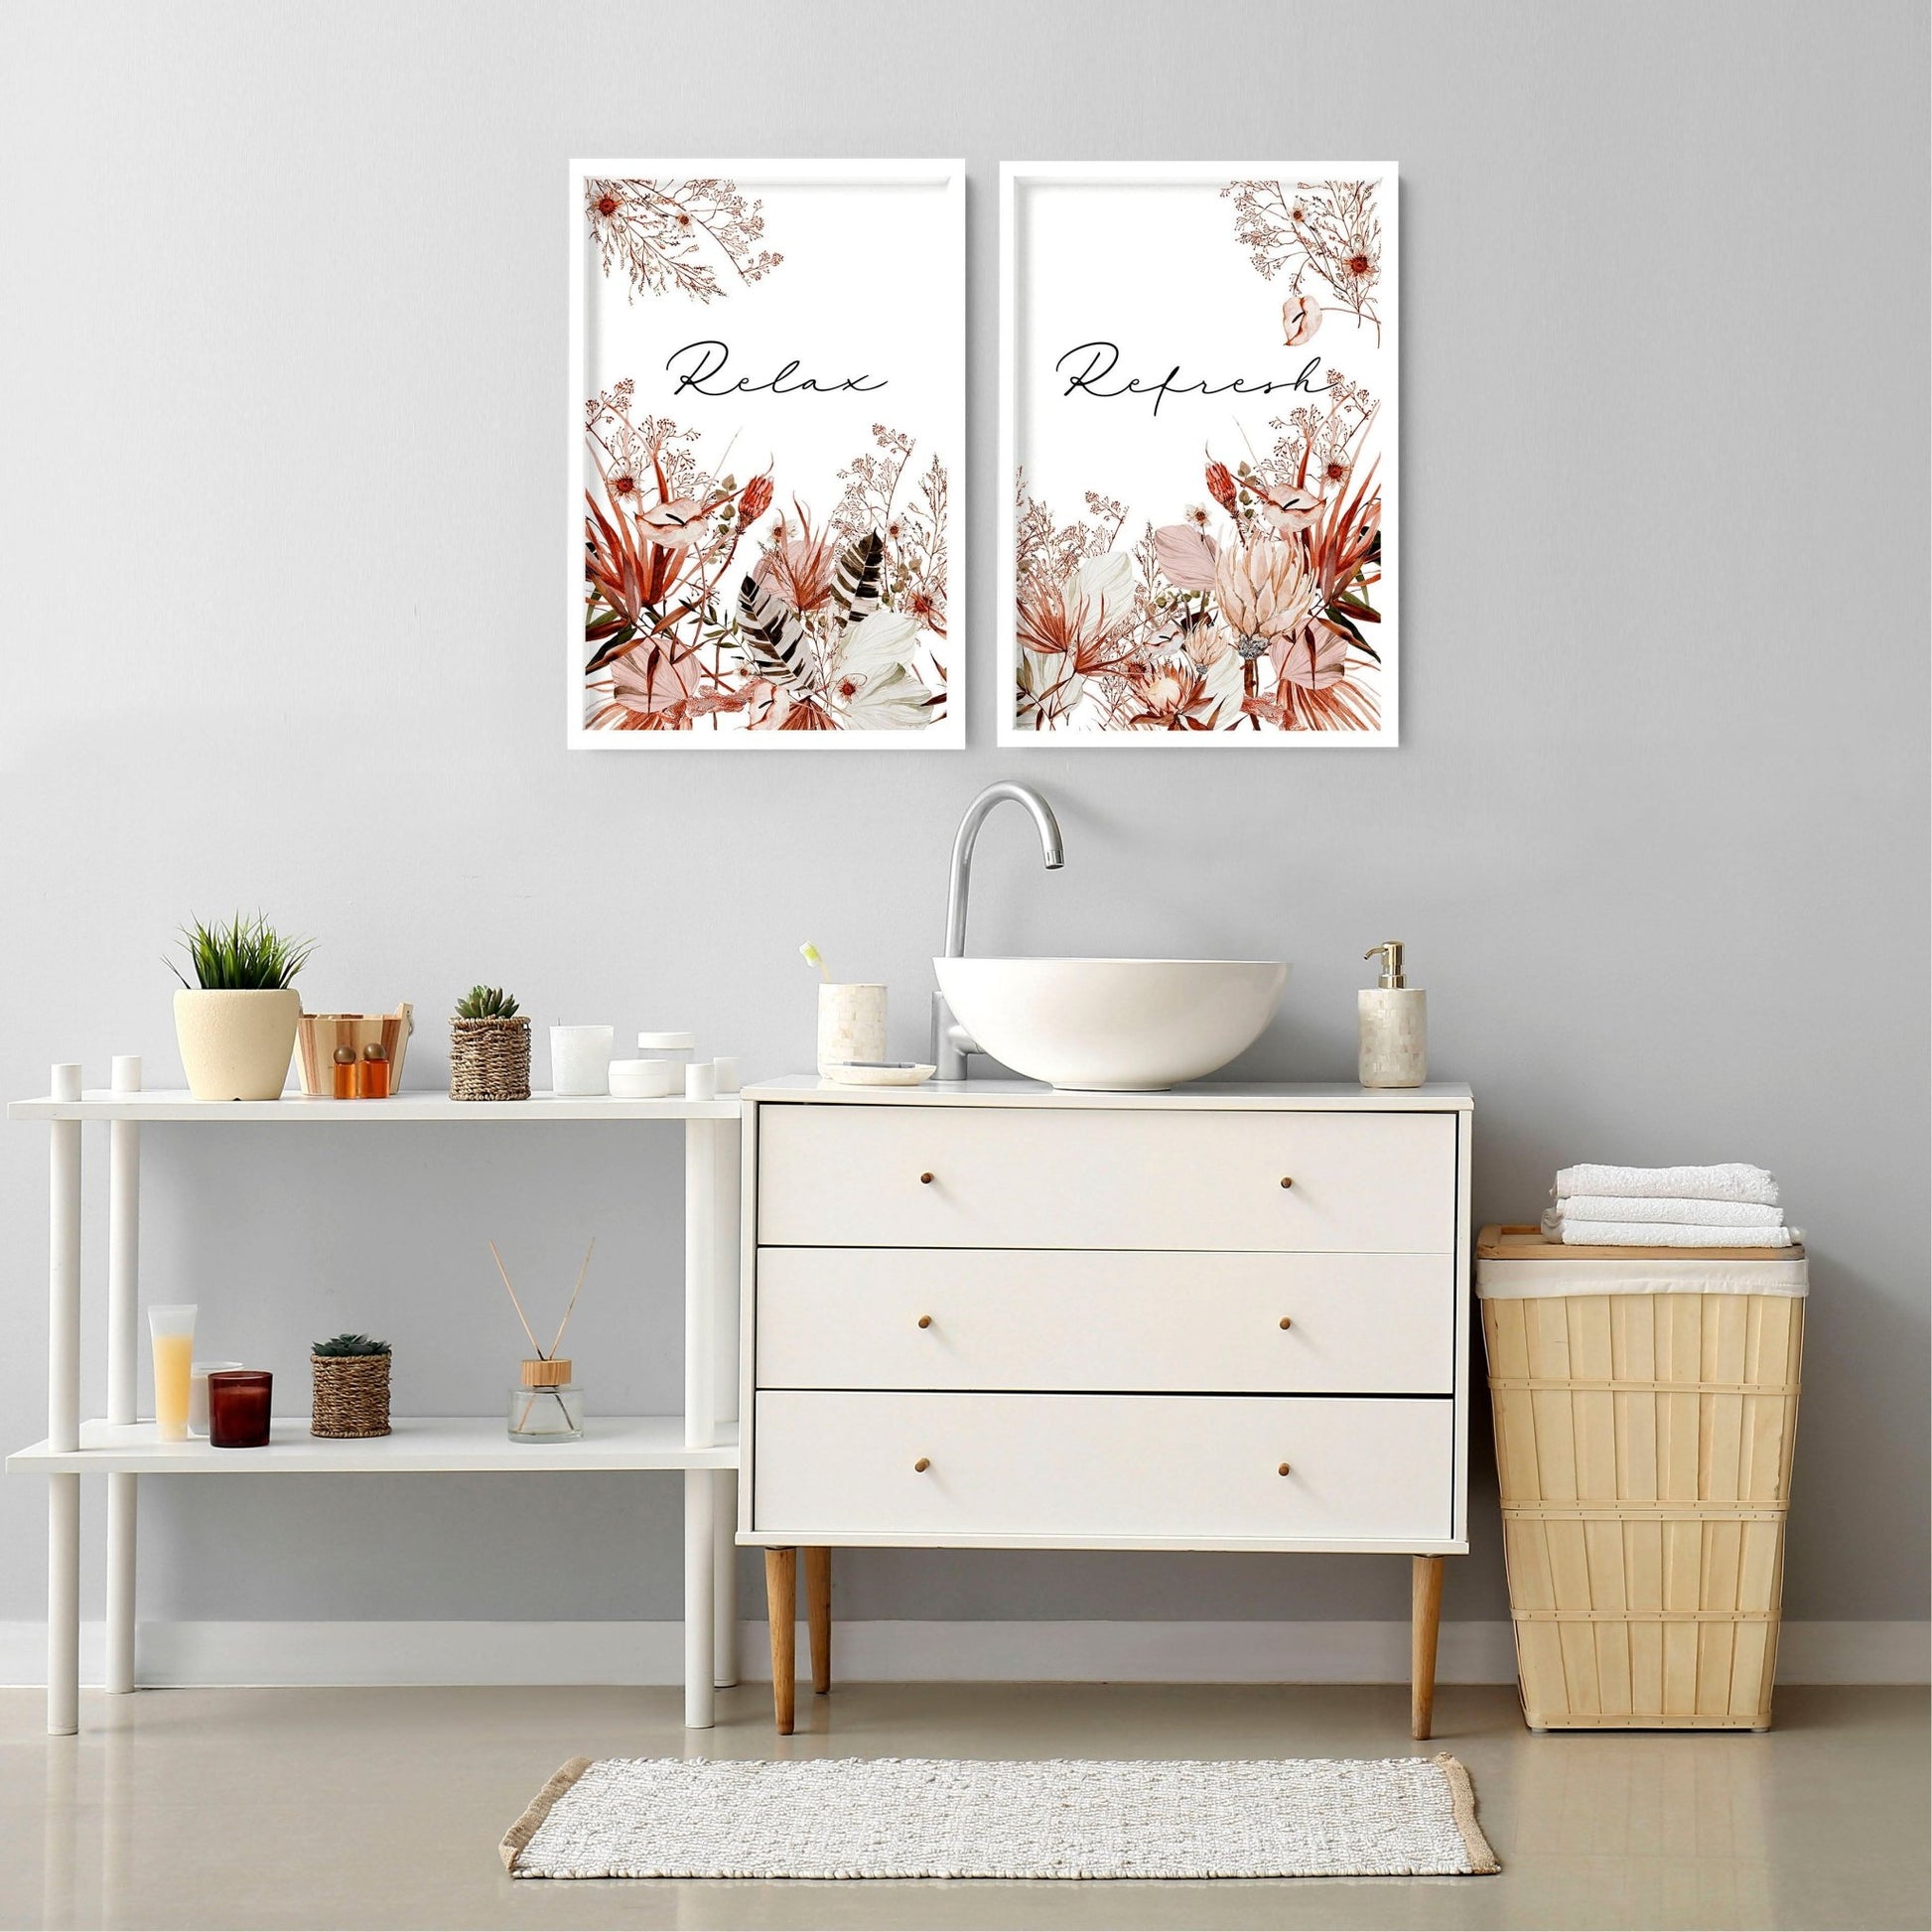 Wall prints for bathroom | Set of 2 art prints - About Wall Art